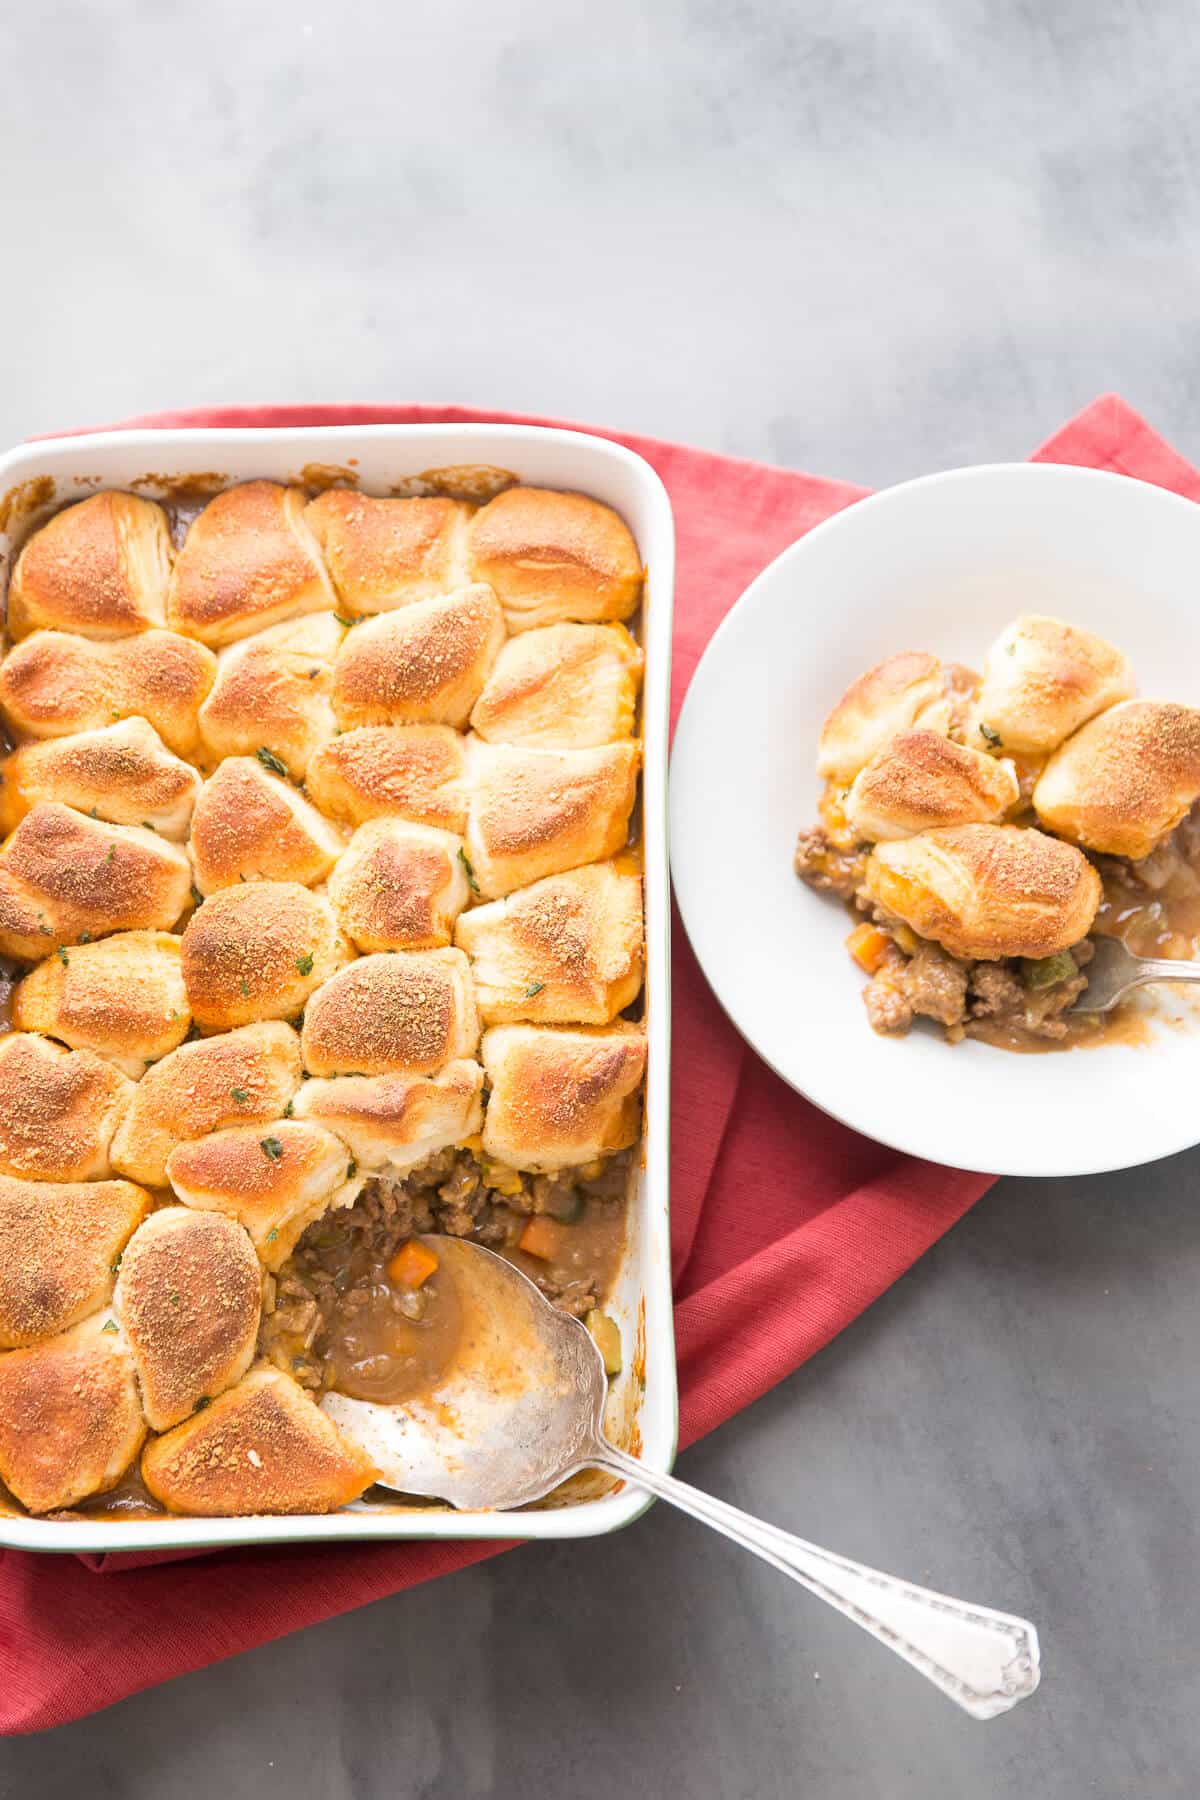 Cheeseburger pot pie is a simple, home cooked comfort food that will both please and nourish your family.